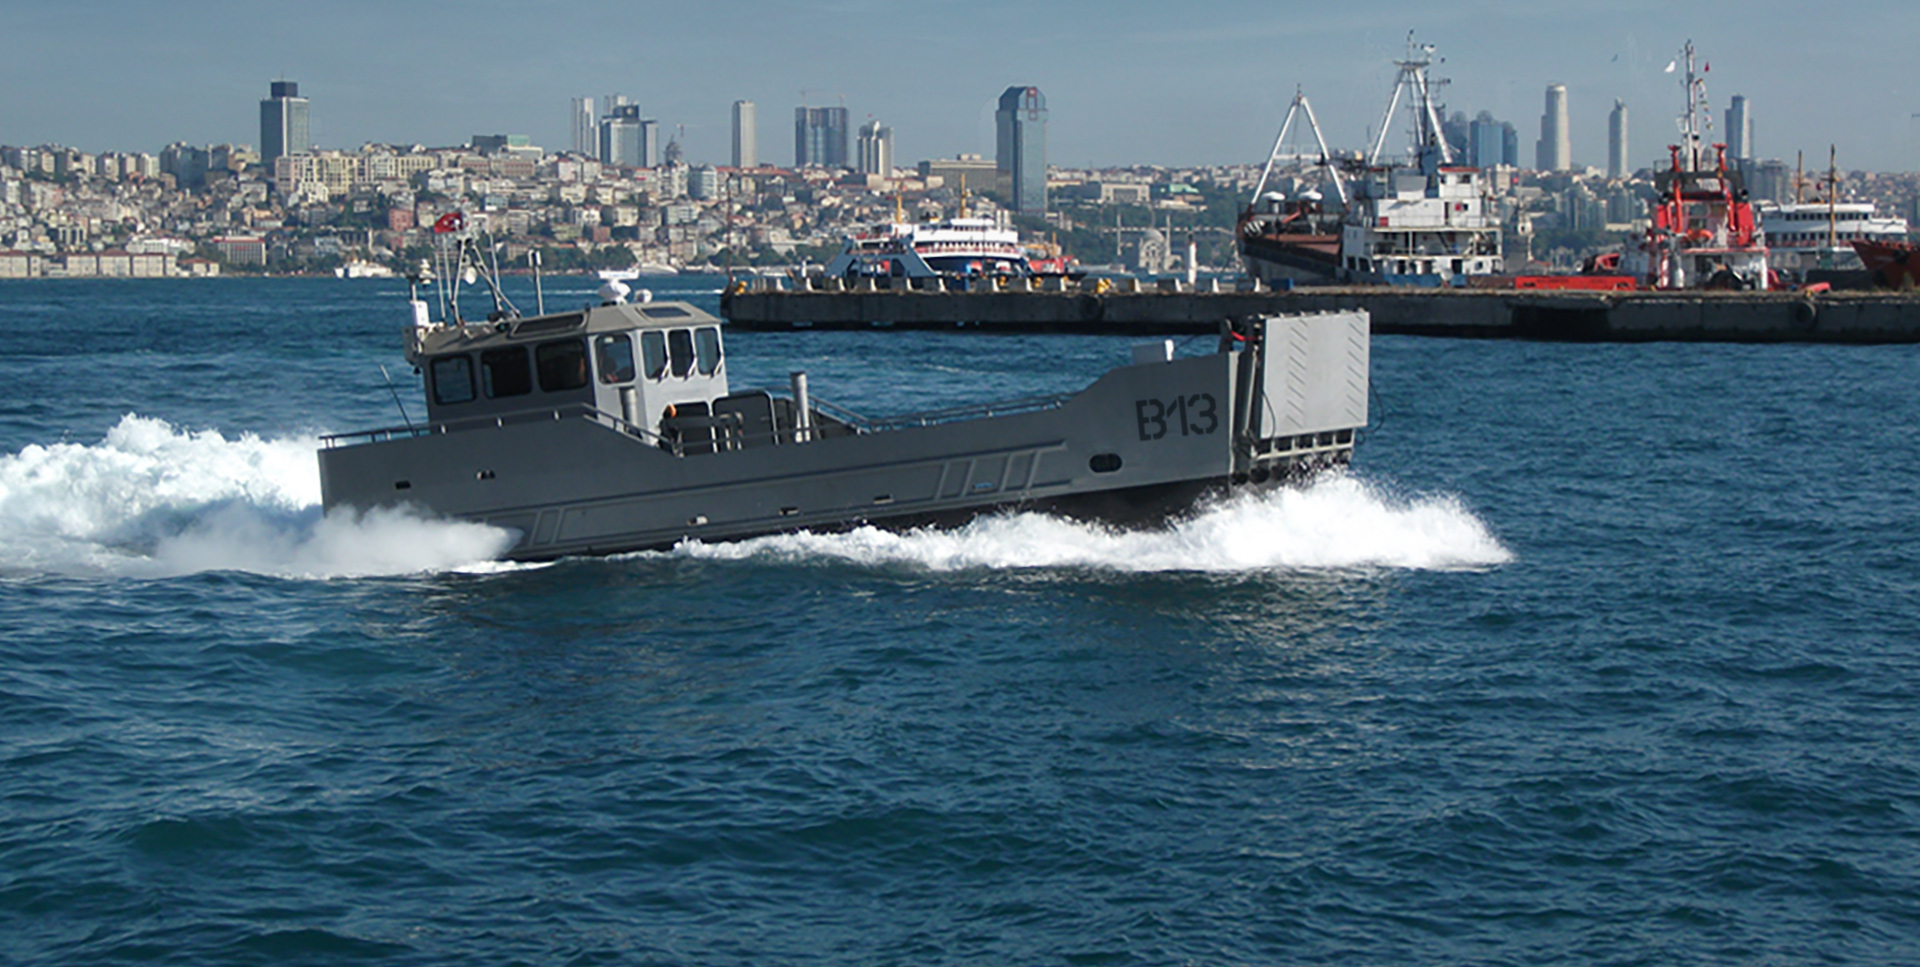 15M Landing Craft Loyd Offers Different Type Of Military Vessels ; Patrol Boat , Rescue Boat, Anti Piracy Boat , Rib , Landing Craft . Standard Dimensions For Military Boats; From Loa:7 Meters To Loa:24 Meters. Our Standard Equipments; As Main Engines Man , Cummins , Doosan , Caterpillar , Yanmar , Iveco , Scania , Volvo , Baudouin , Mitsubishi , Mercury. As Gear Box ; Zf , Dongi , Twindisc .